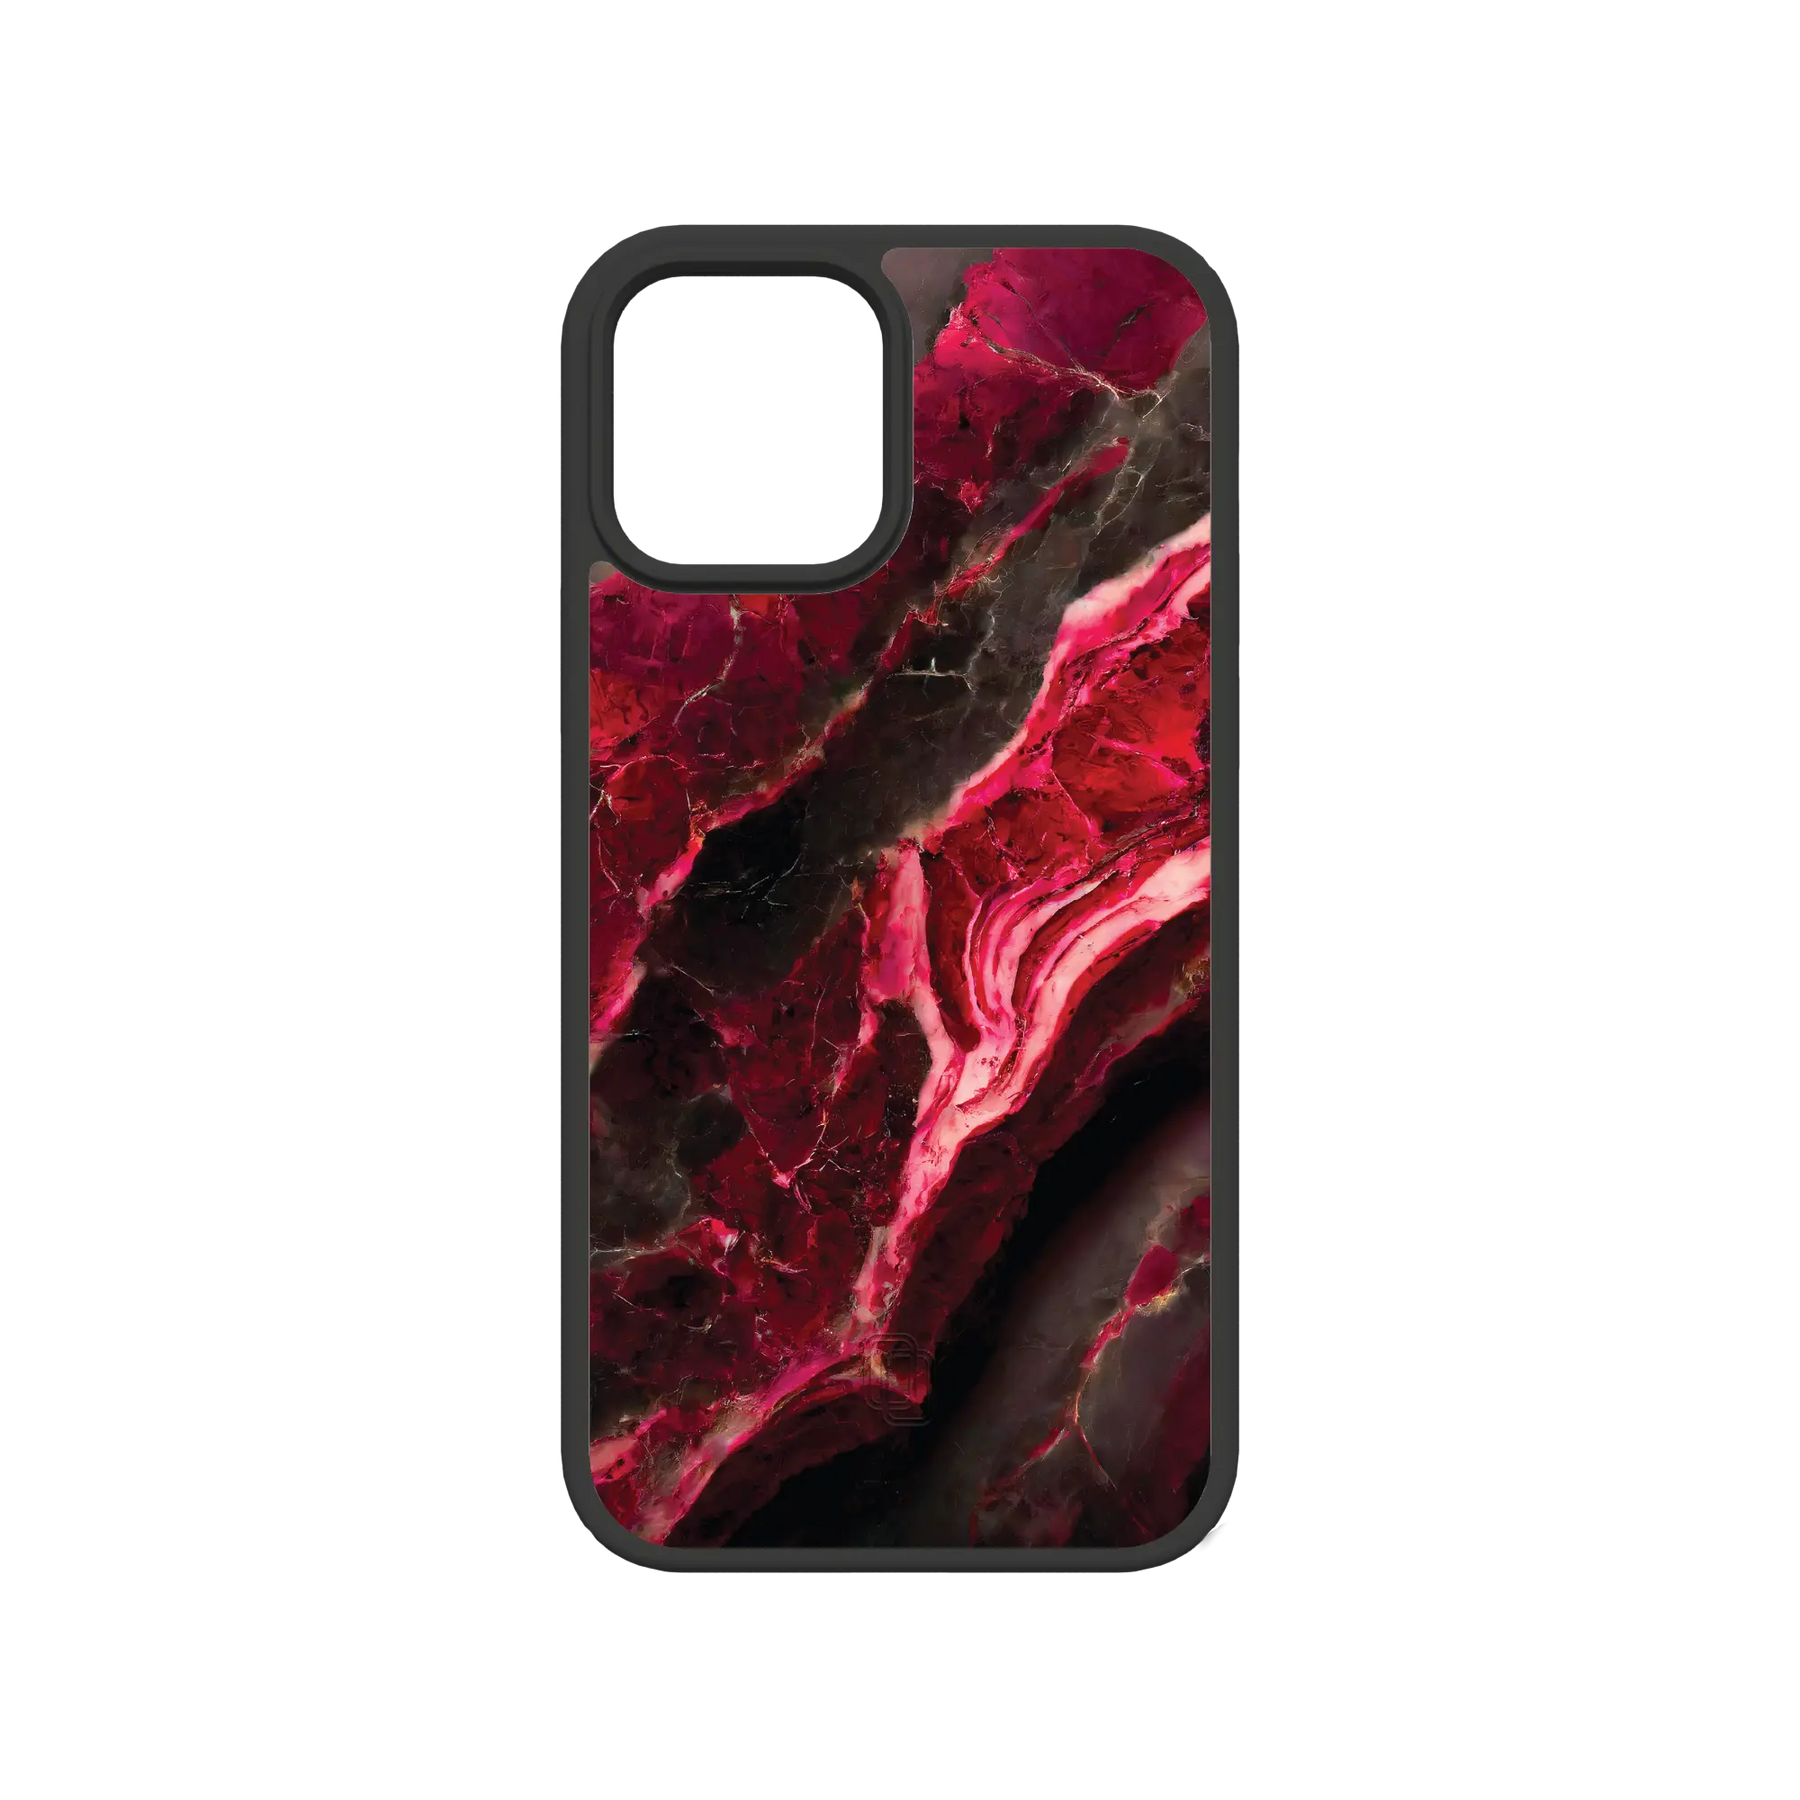 Apple-iPhone-12-12-Pro-Crystal-Clear Morning Sun | Custom MagSafe Red Marble Case for Apple iPhone 12 Series cellhelmet cellhelmet